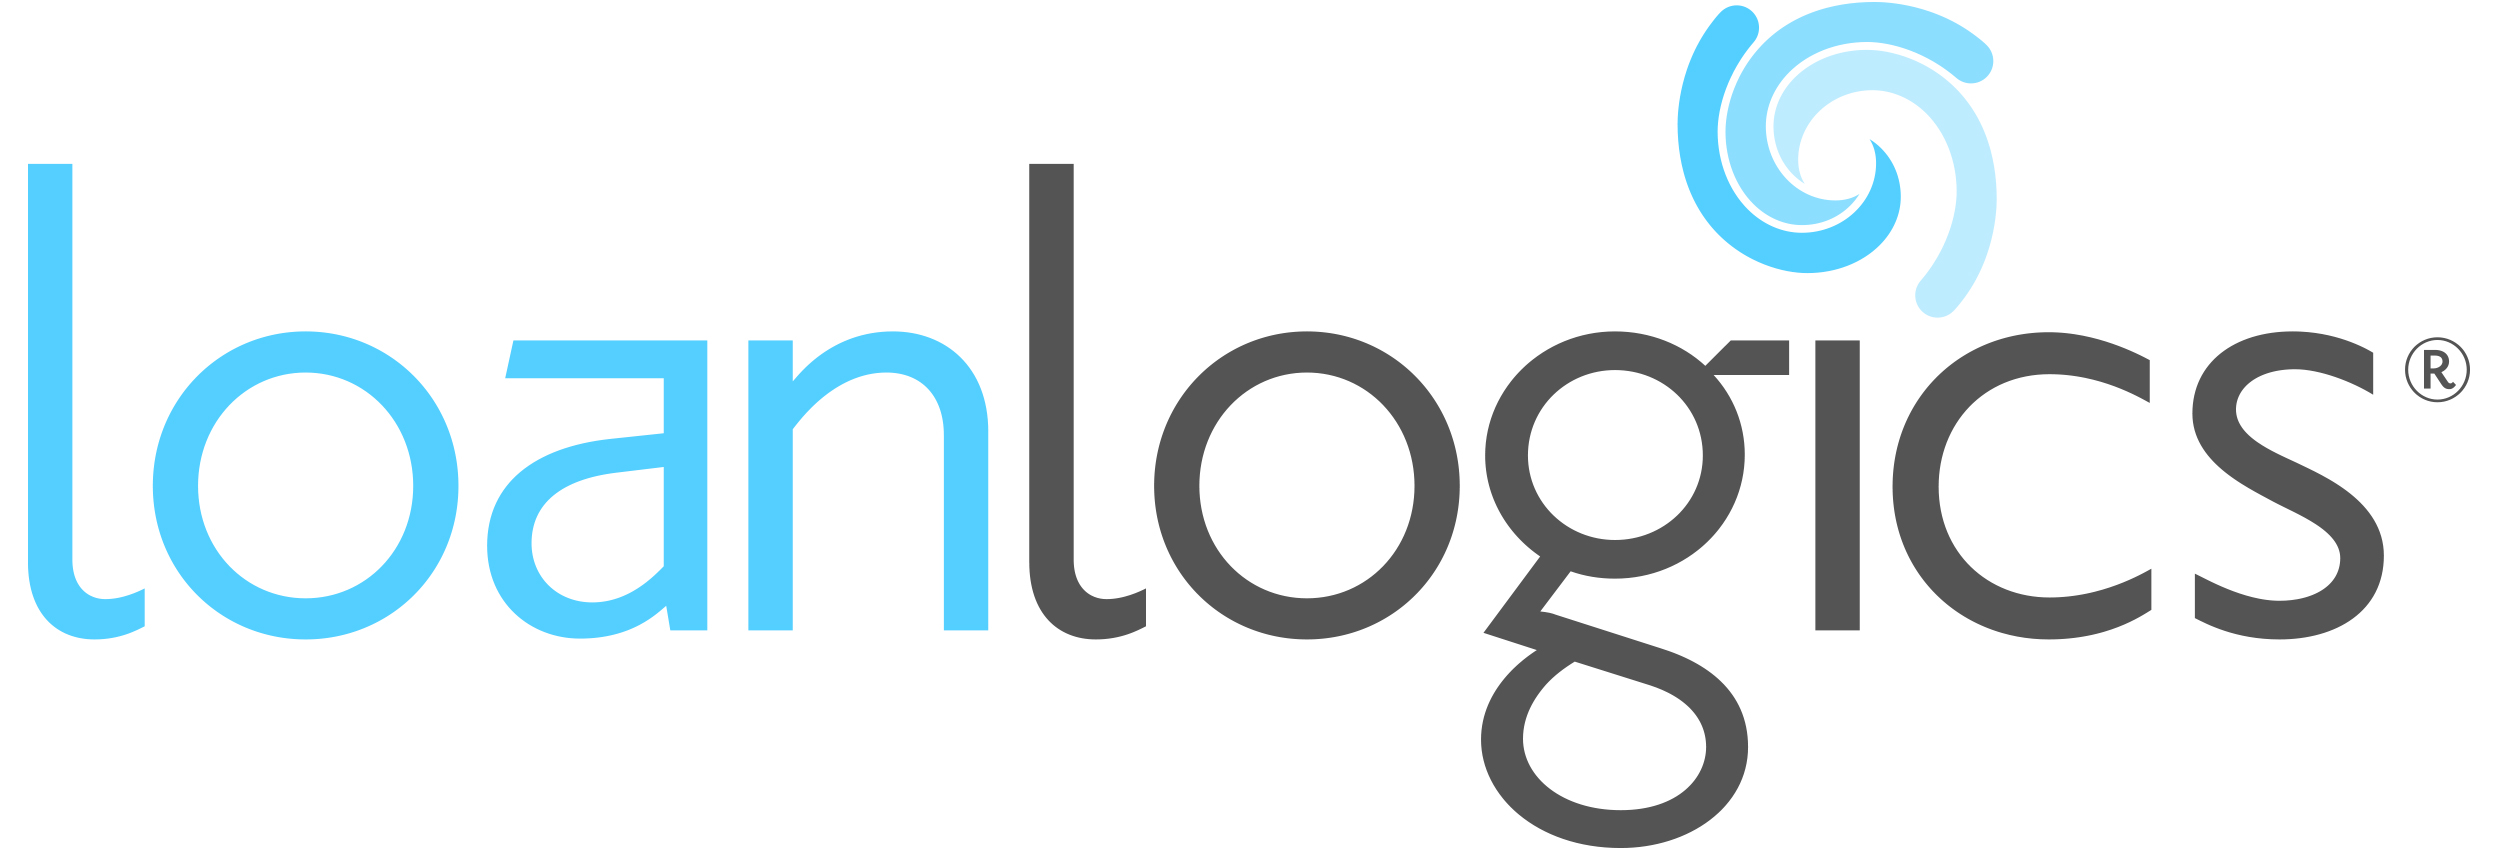 LoanLogics has announced a partnership with Transformational Mortgage Solutions (TMS), a provider of management consulting services for the mortgage industry